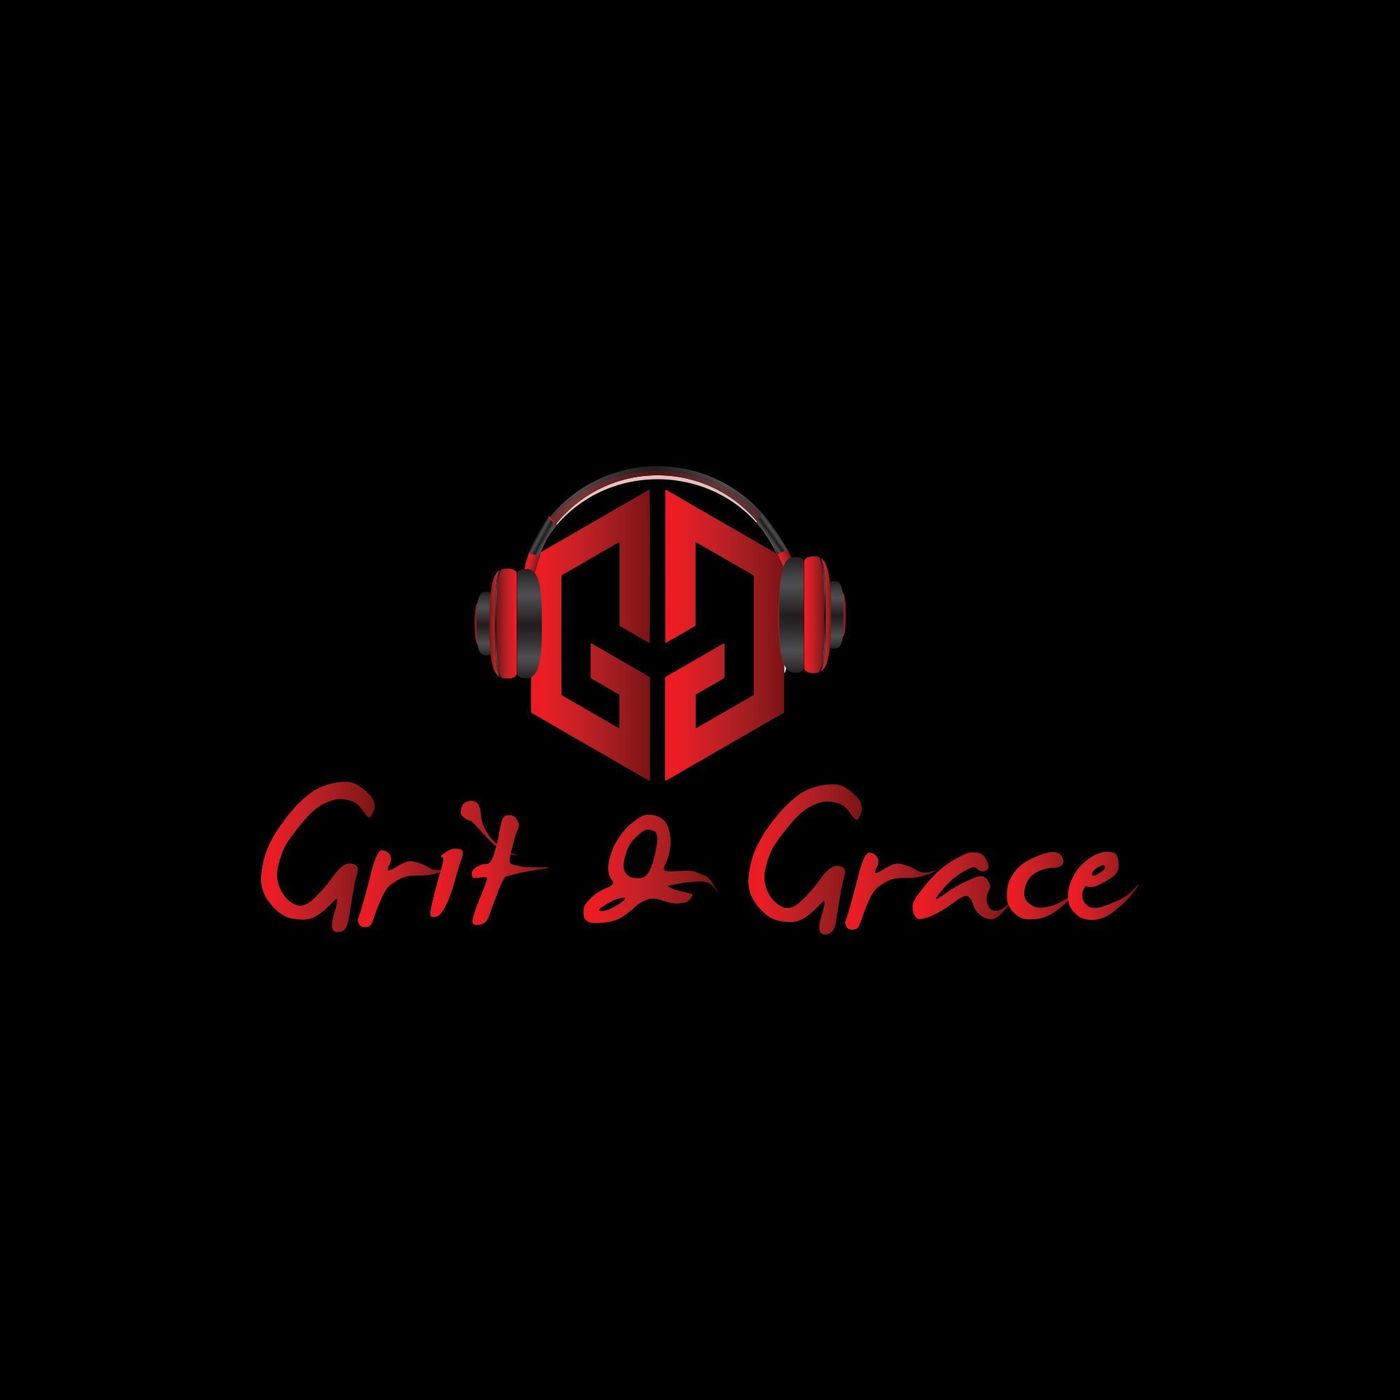 Grit and Grace: The Power of A Tribe